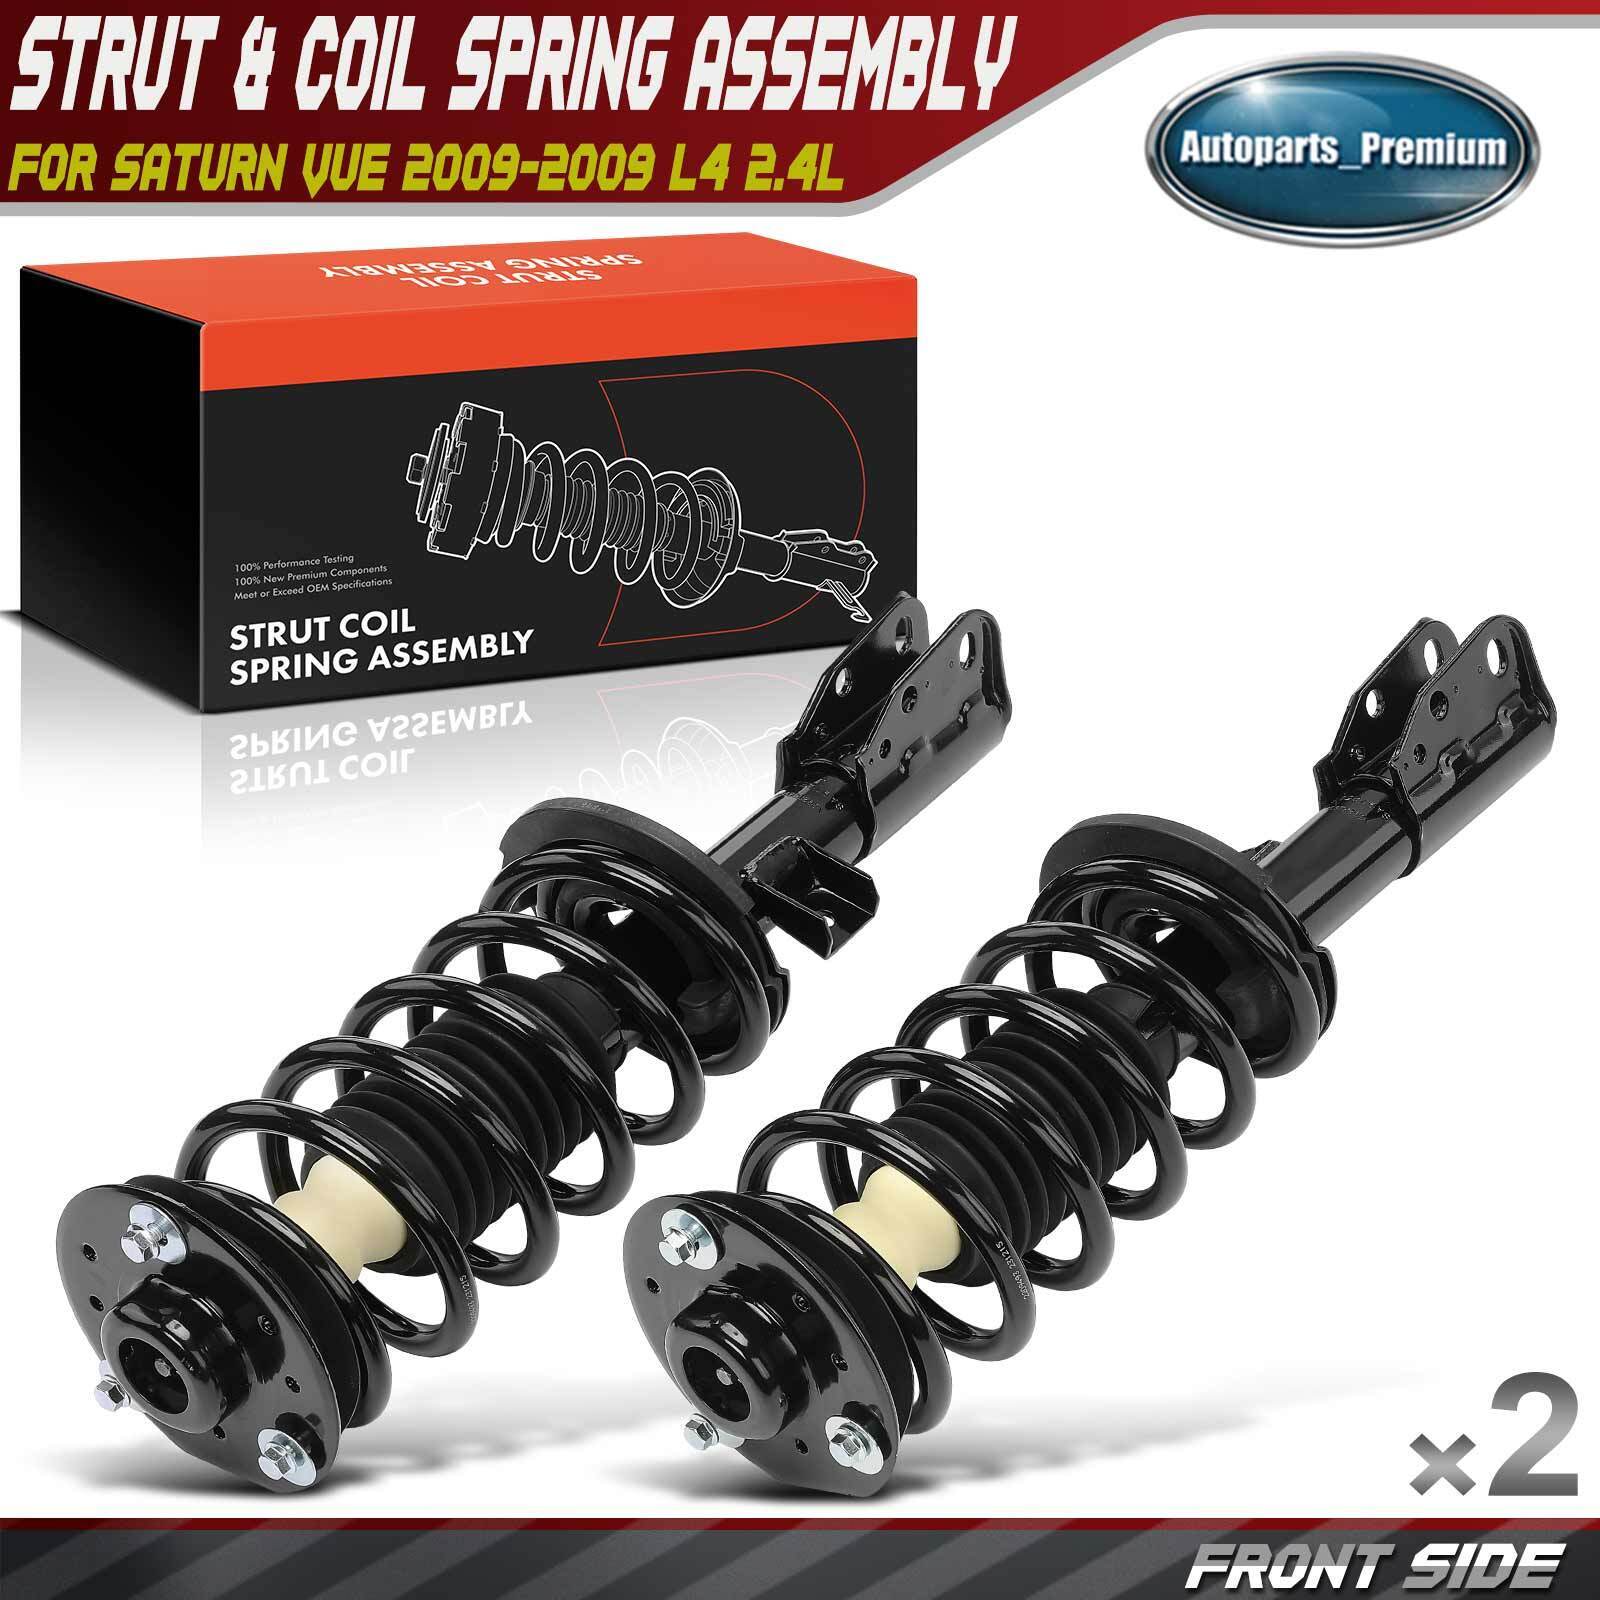 2x Front Left & Right Complete Strut & Coil Spring Assembly for Saturn Vue 2009